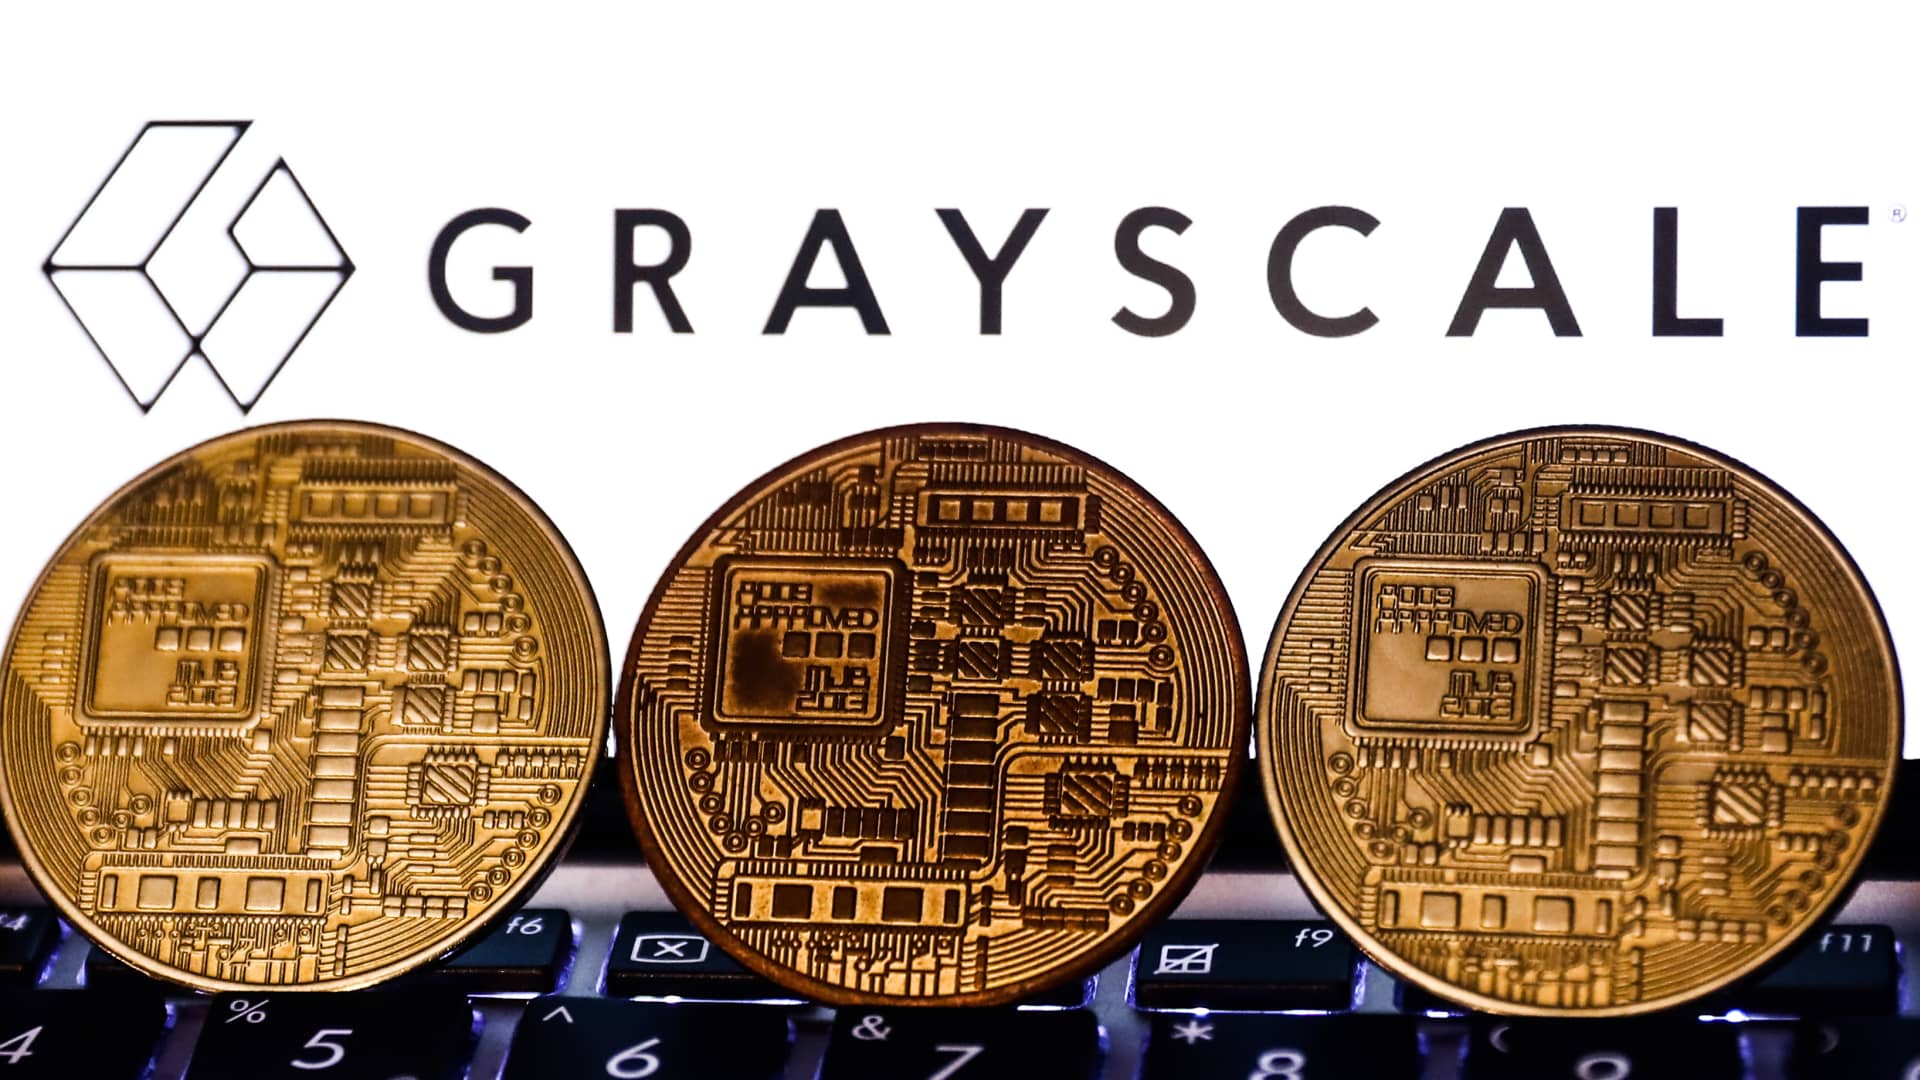 Grayscale is suing the SEC after rejecting an offer to convert bitcoin funds into ETFs